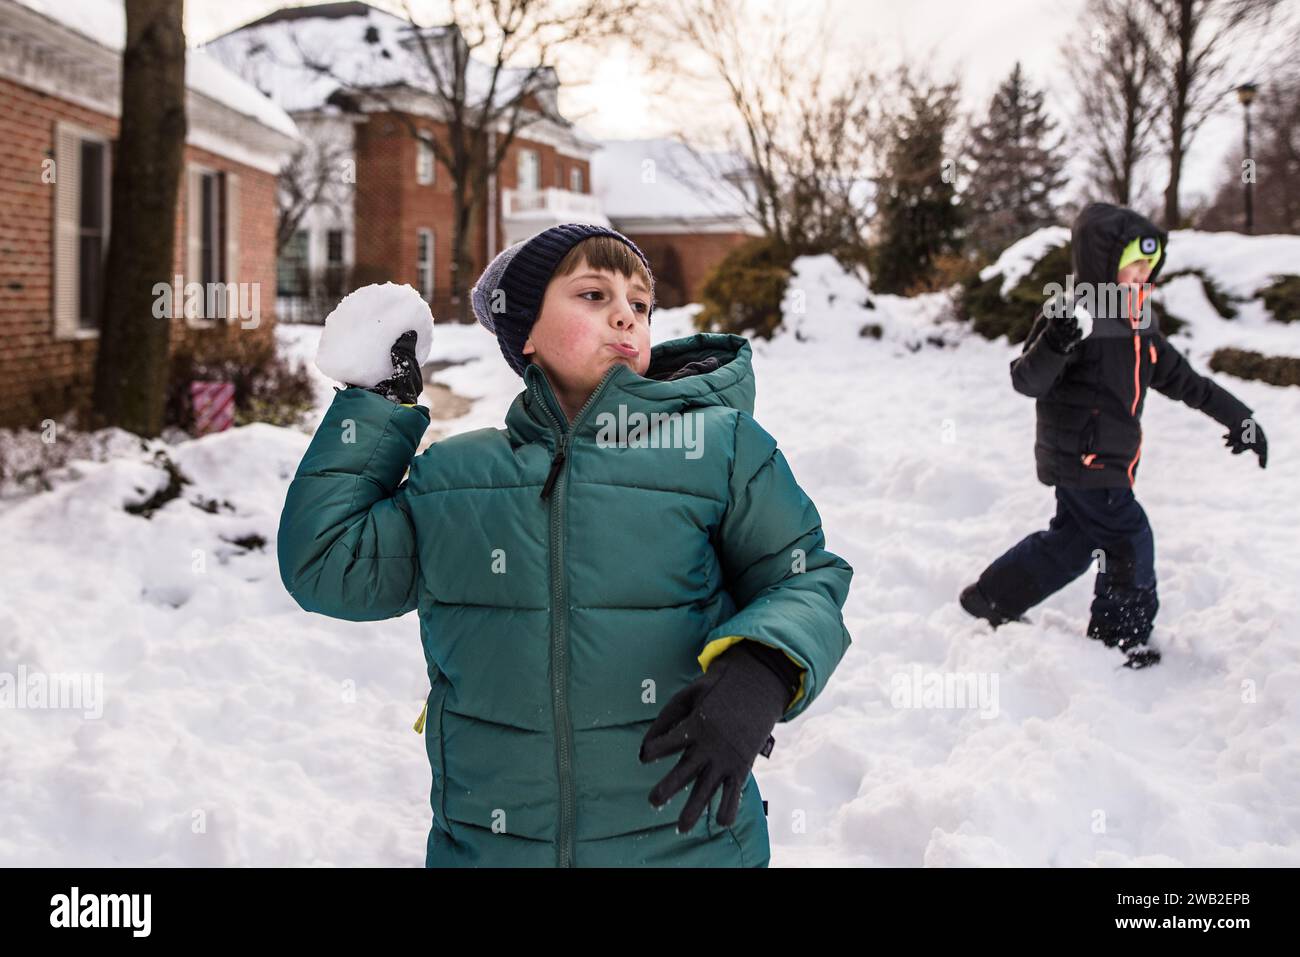 Boys in snow gear get ready to throw snowballs in yard Stock Photo